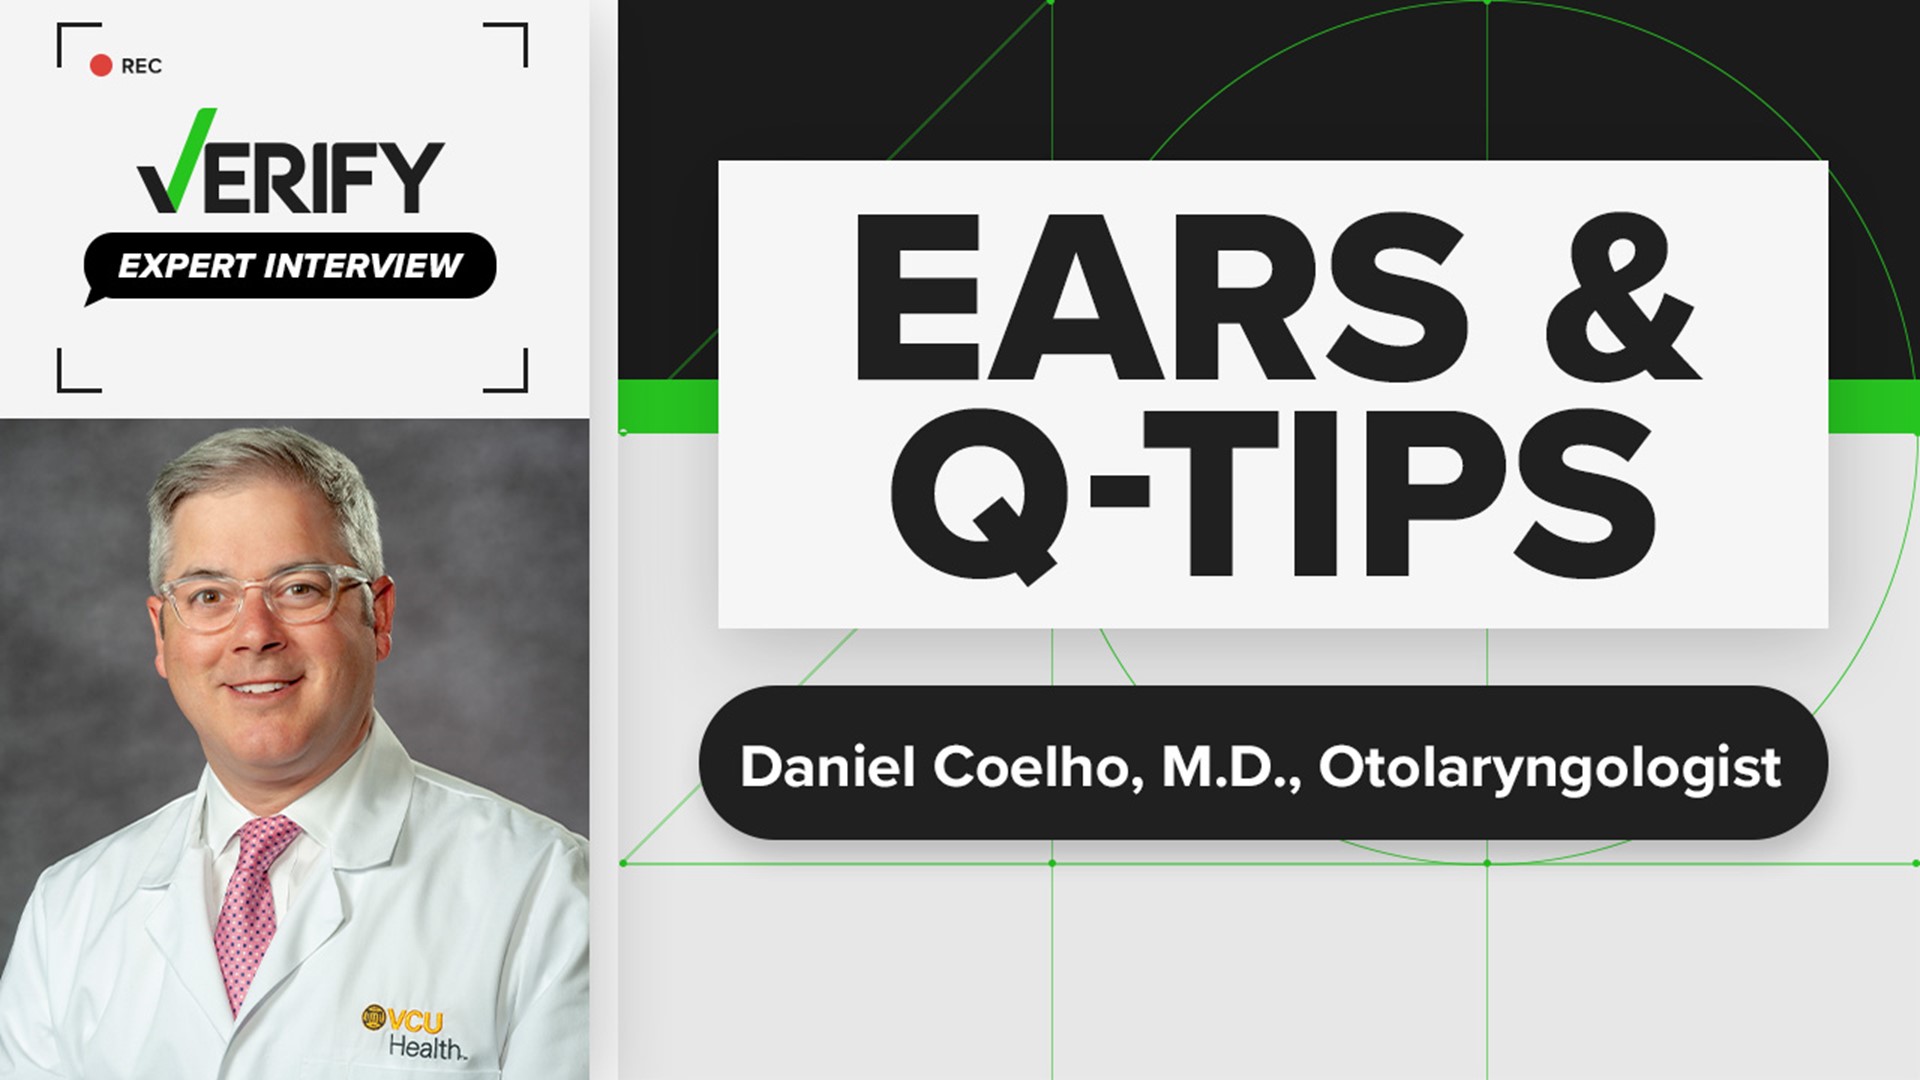 Daniel Coelho, M.D. talks with VERIFY about ear safety including using hydrogen peroxide and best way to use Q-Tips.